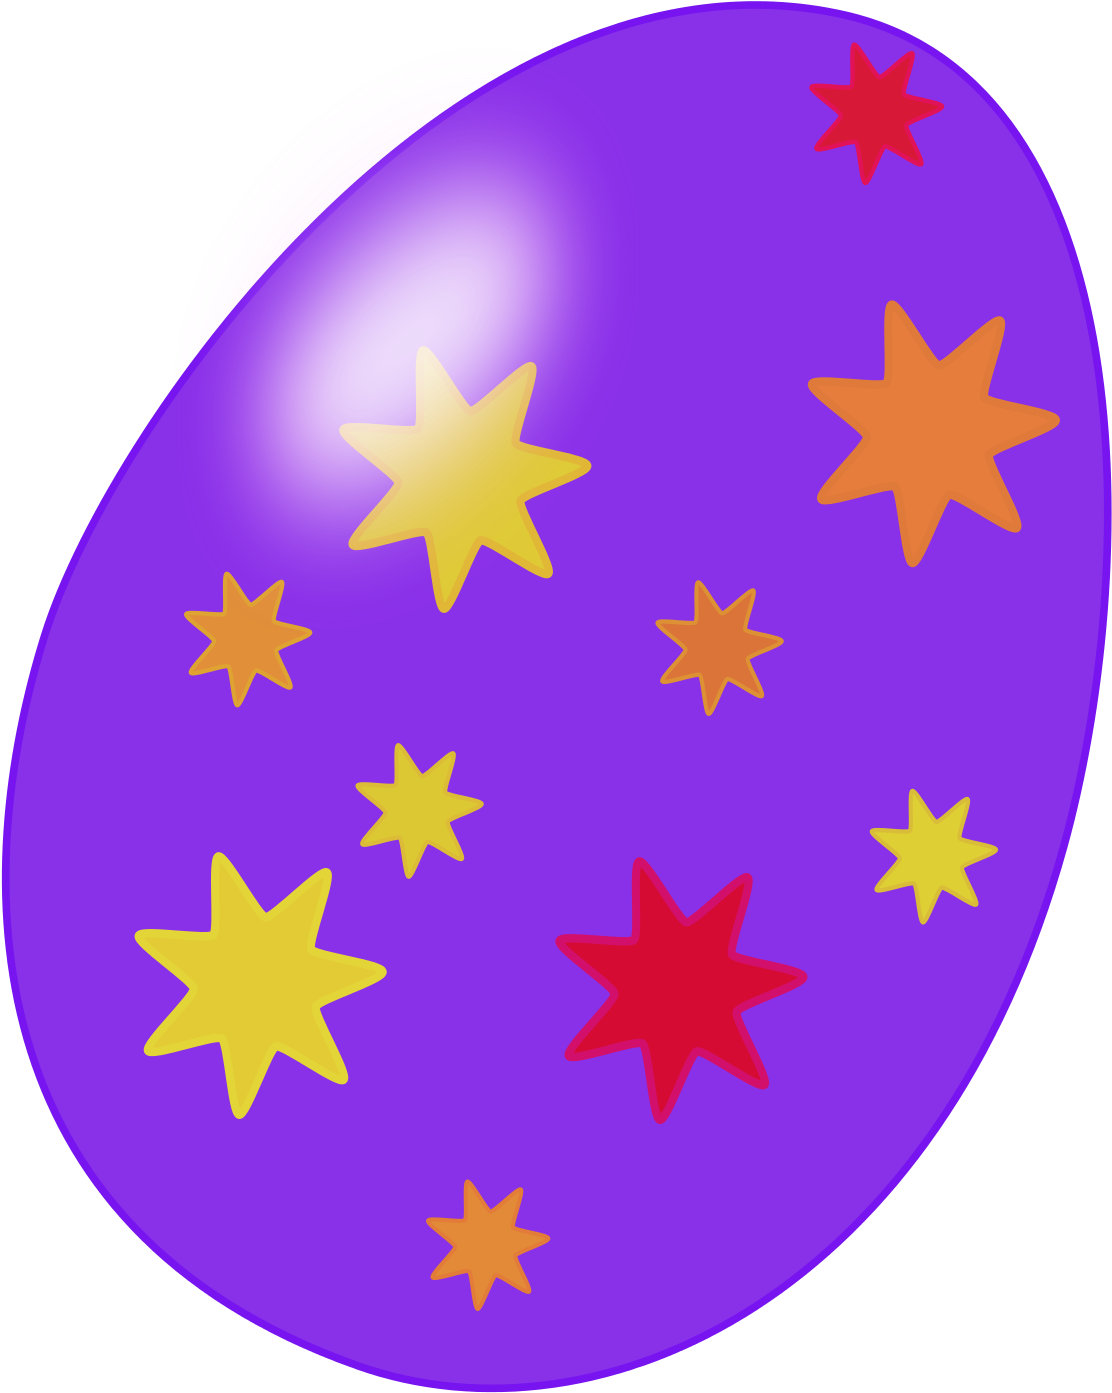 Easter Day Clip Art And Photo March Calendar - Easter Eggs With Stars (1240x1594)